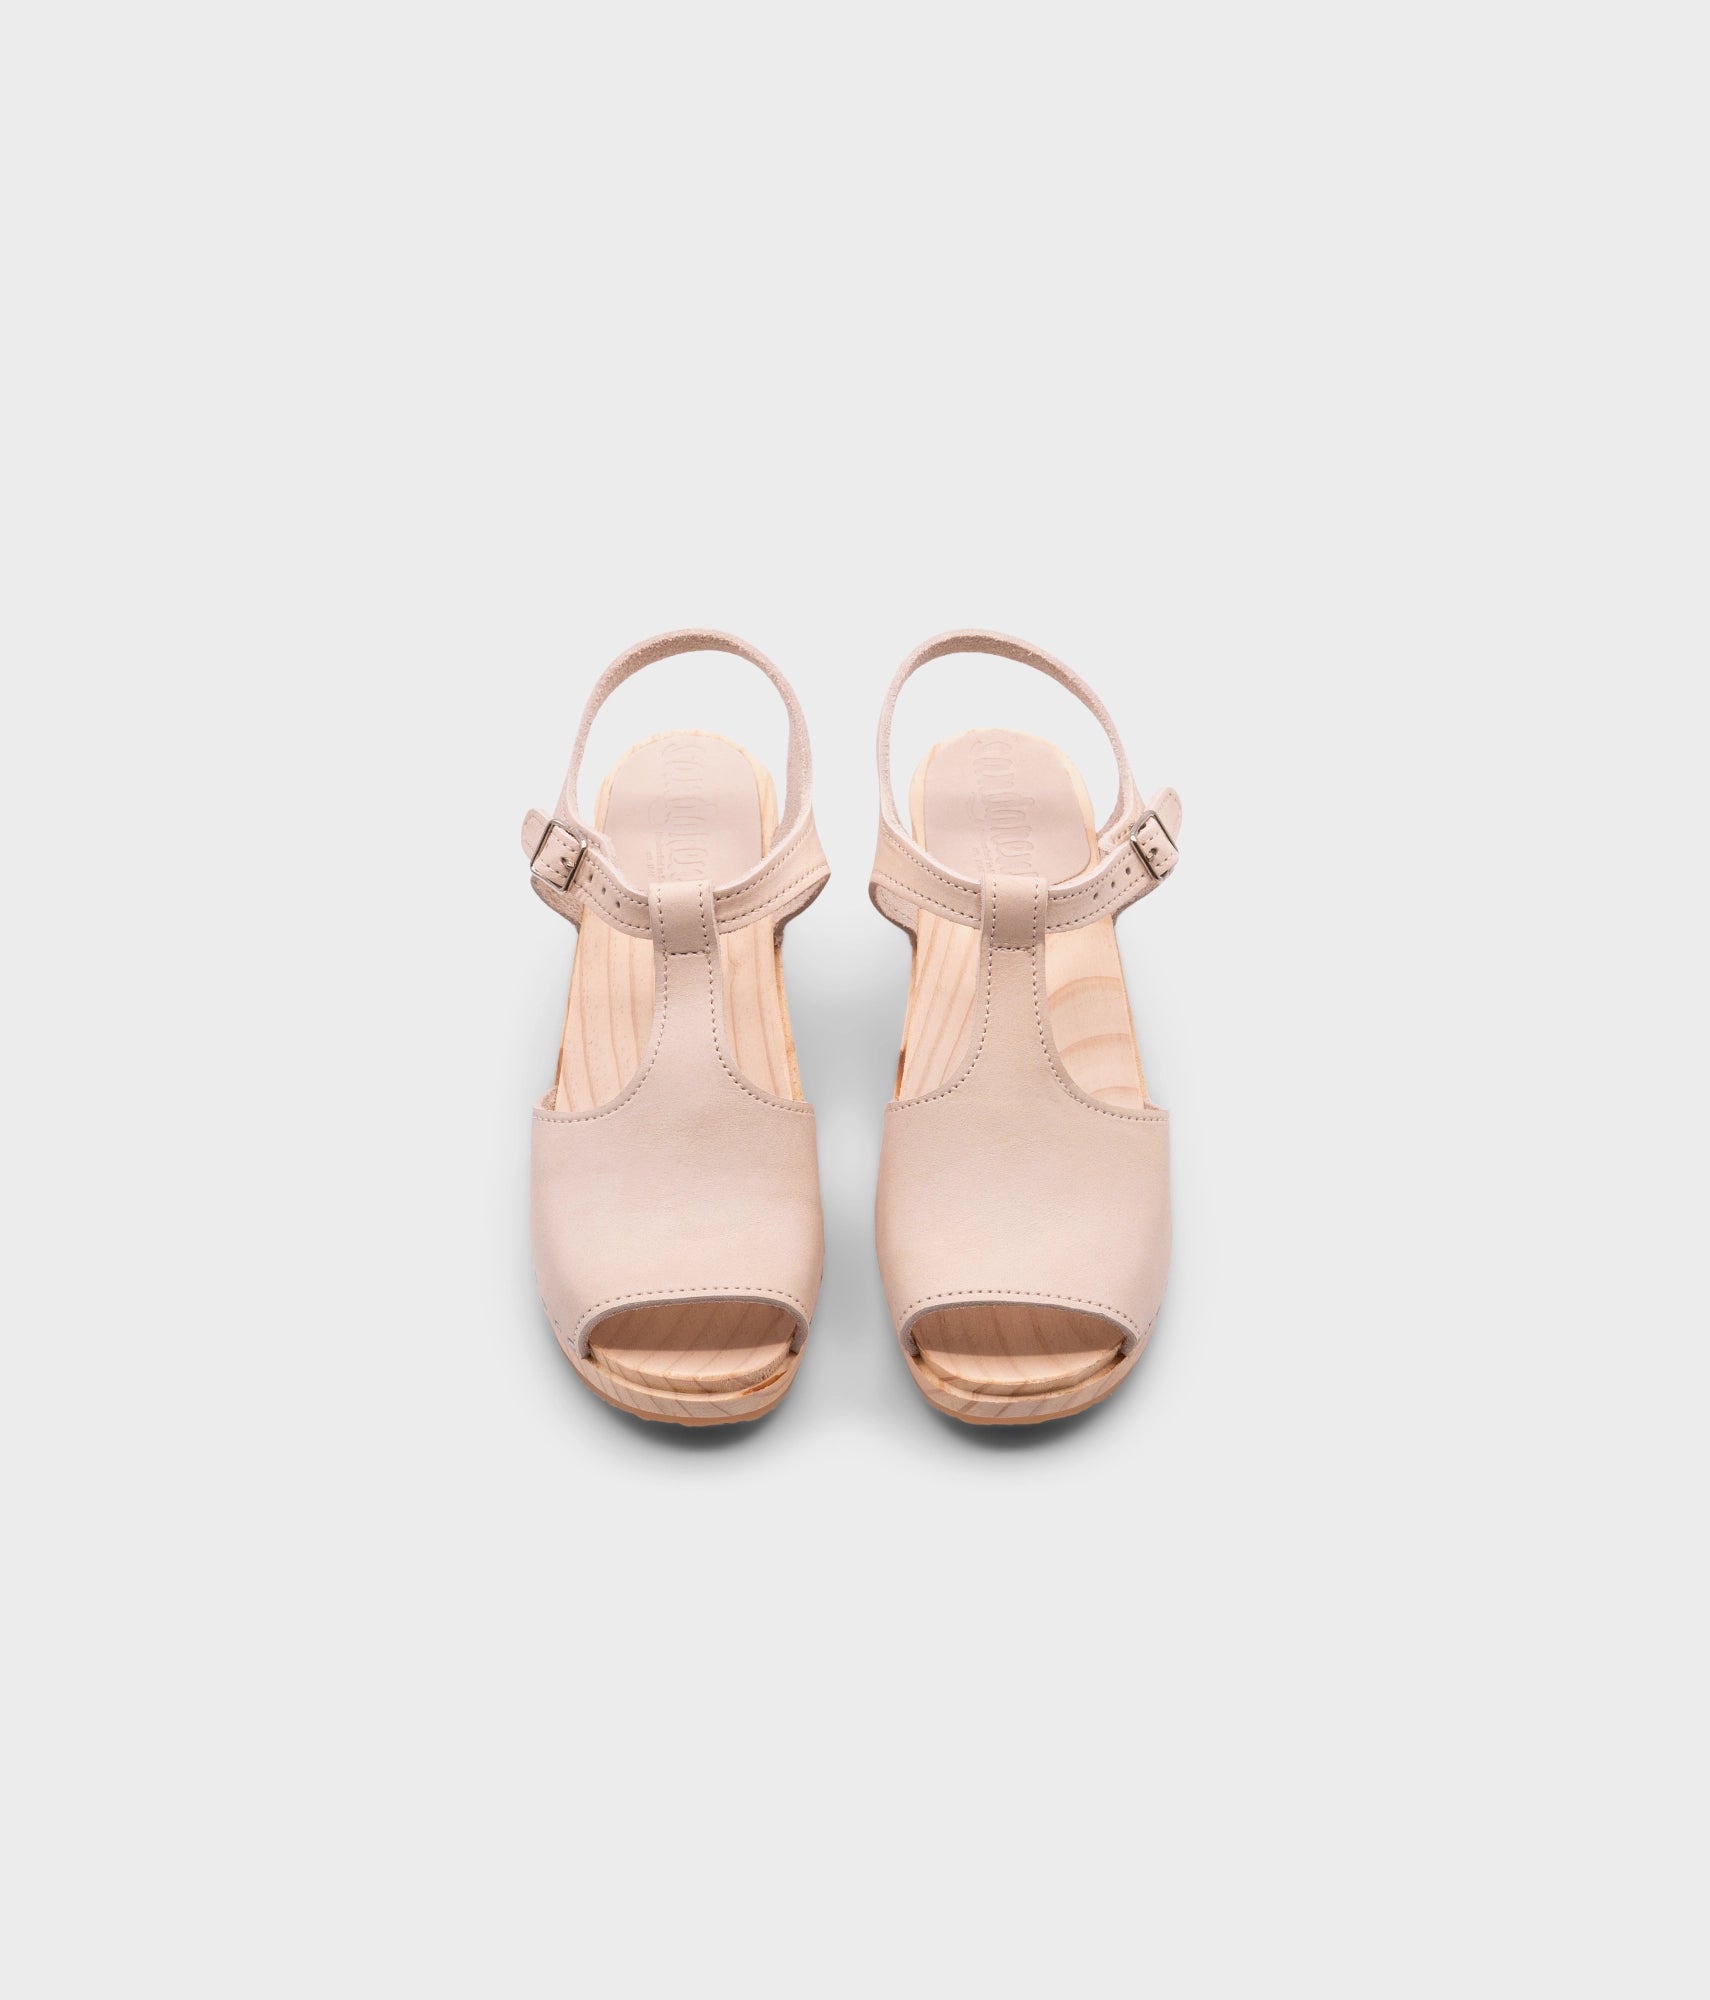 high rise heeled open toe clog sandal in sand white nubuck leather stapled on a light wooden base